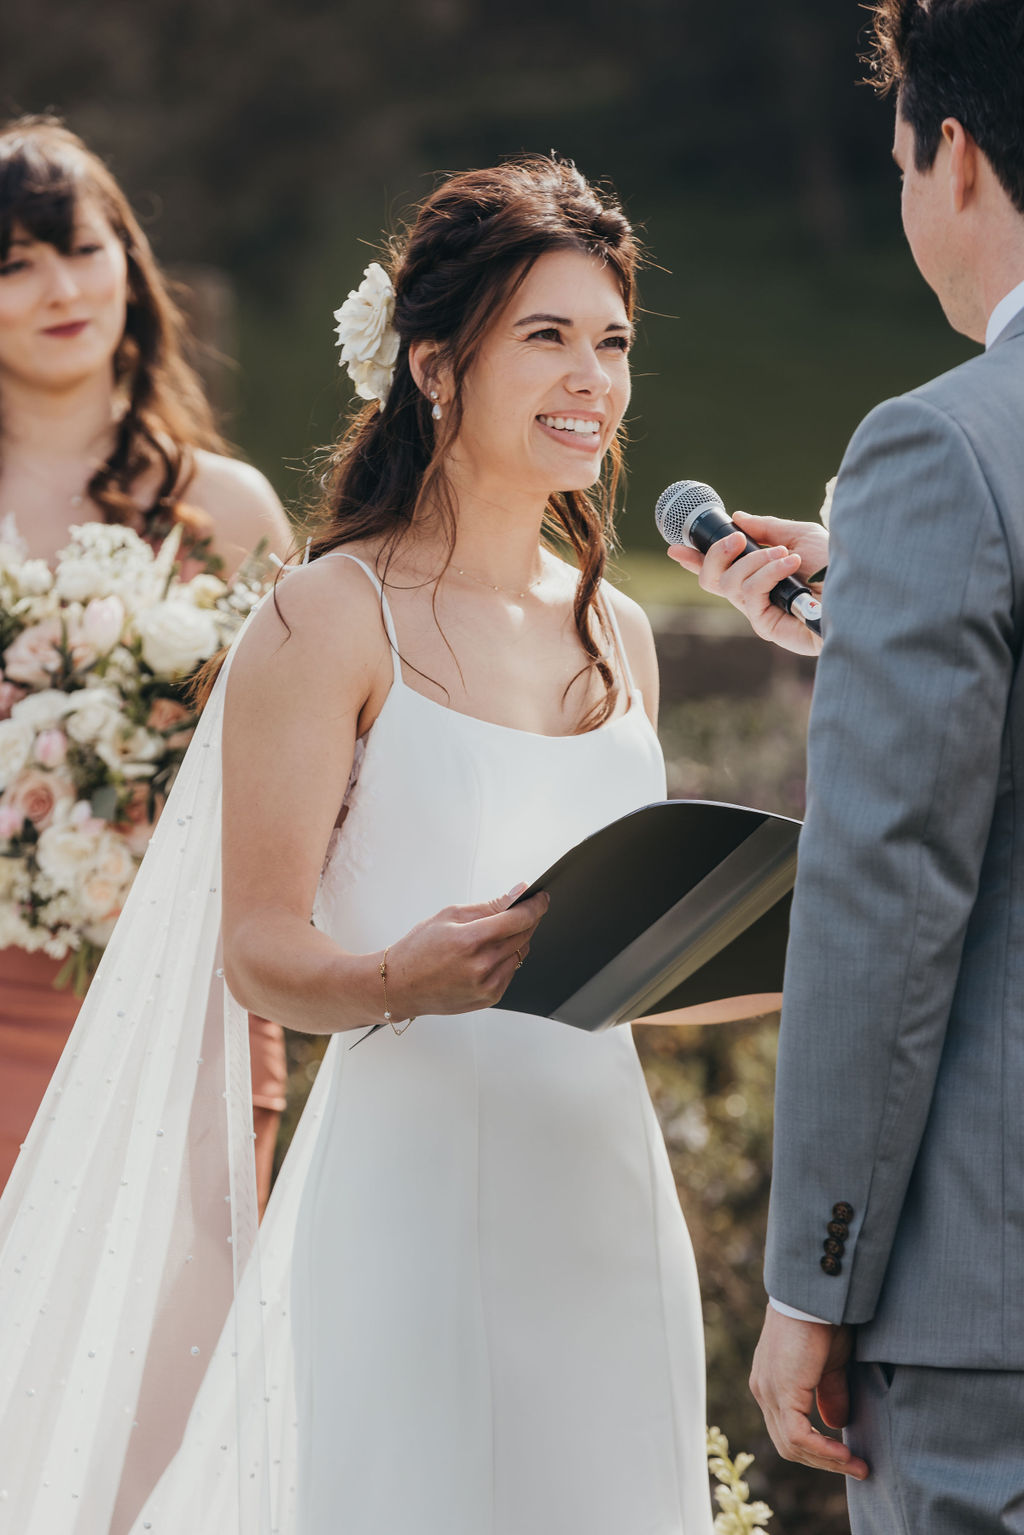 A bride and groom are standing outdoors, holding hands, and facing each other. The groom is wearing a light gray suit with a pink tie, and the bride is in a white dress with lace details and a flower in her hair at the haven at tomales